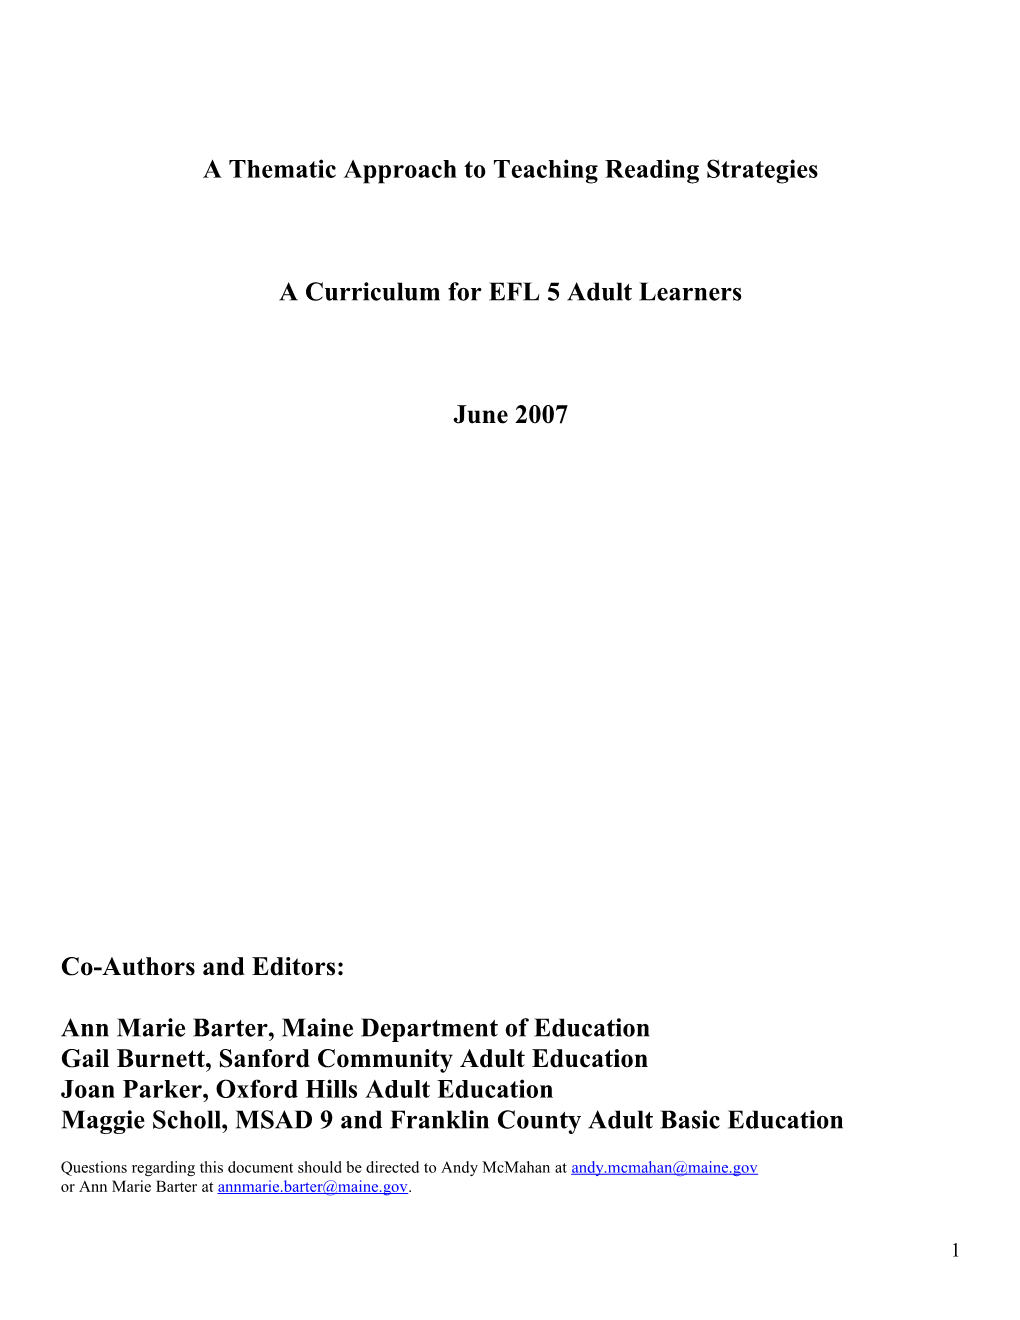 A Thematic Approach to Teaching Reading Strategies